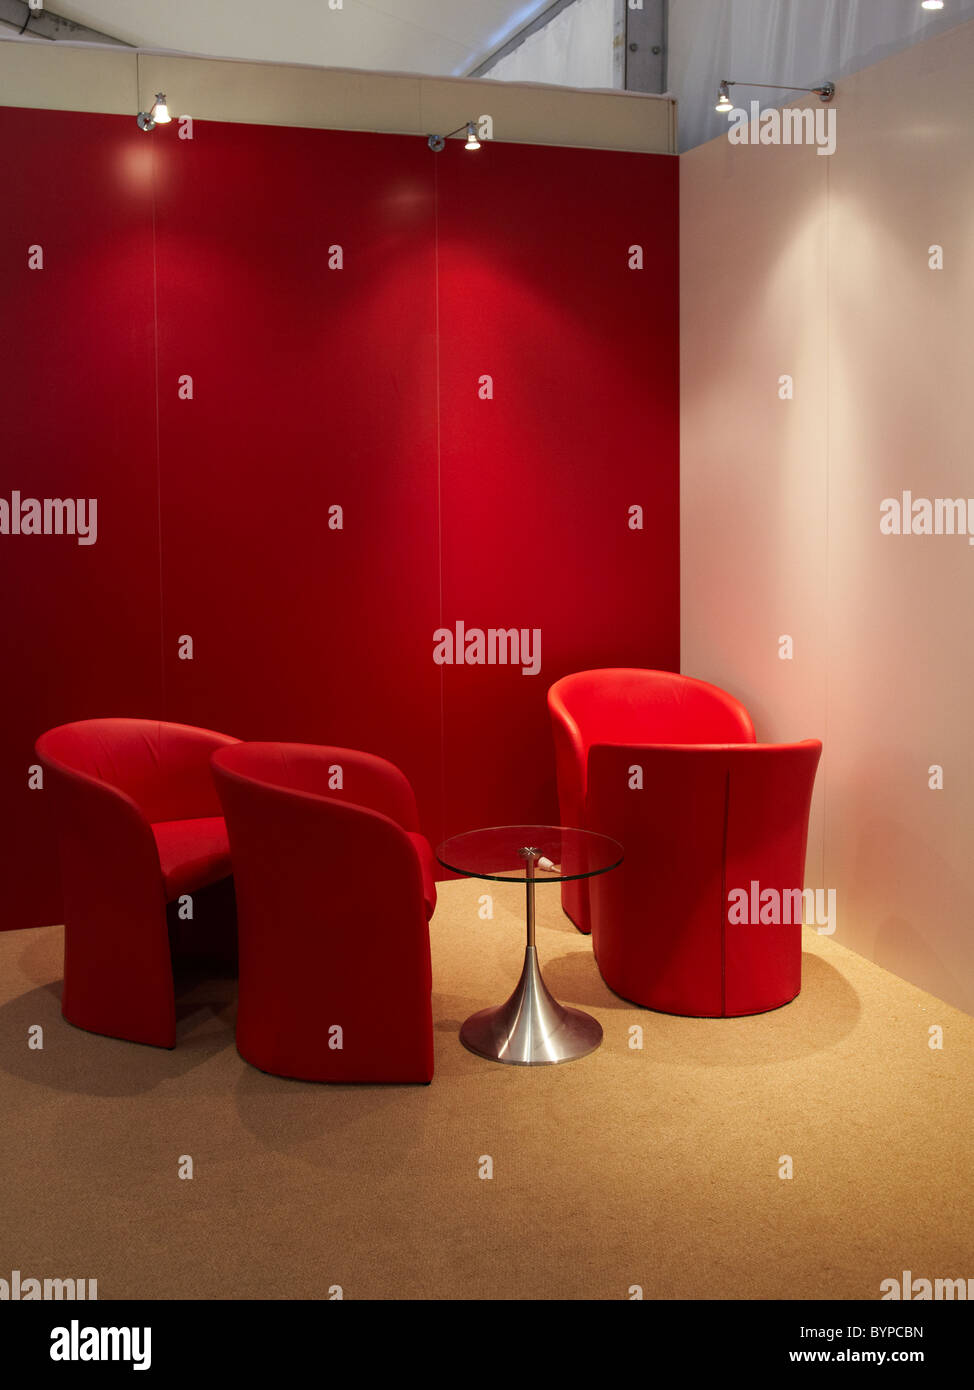 Red chairs and table situated in interior space with red and white walls, waiting area Stock Photo